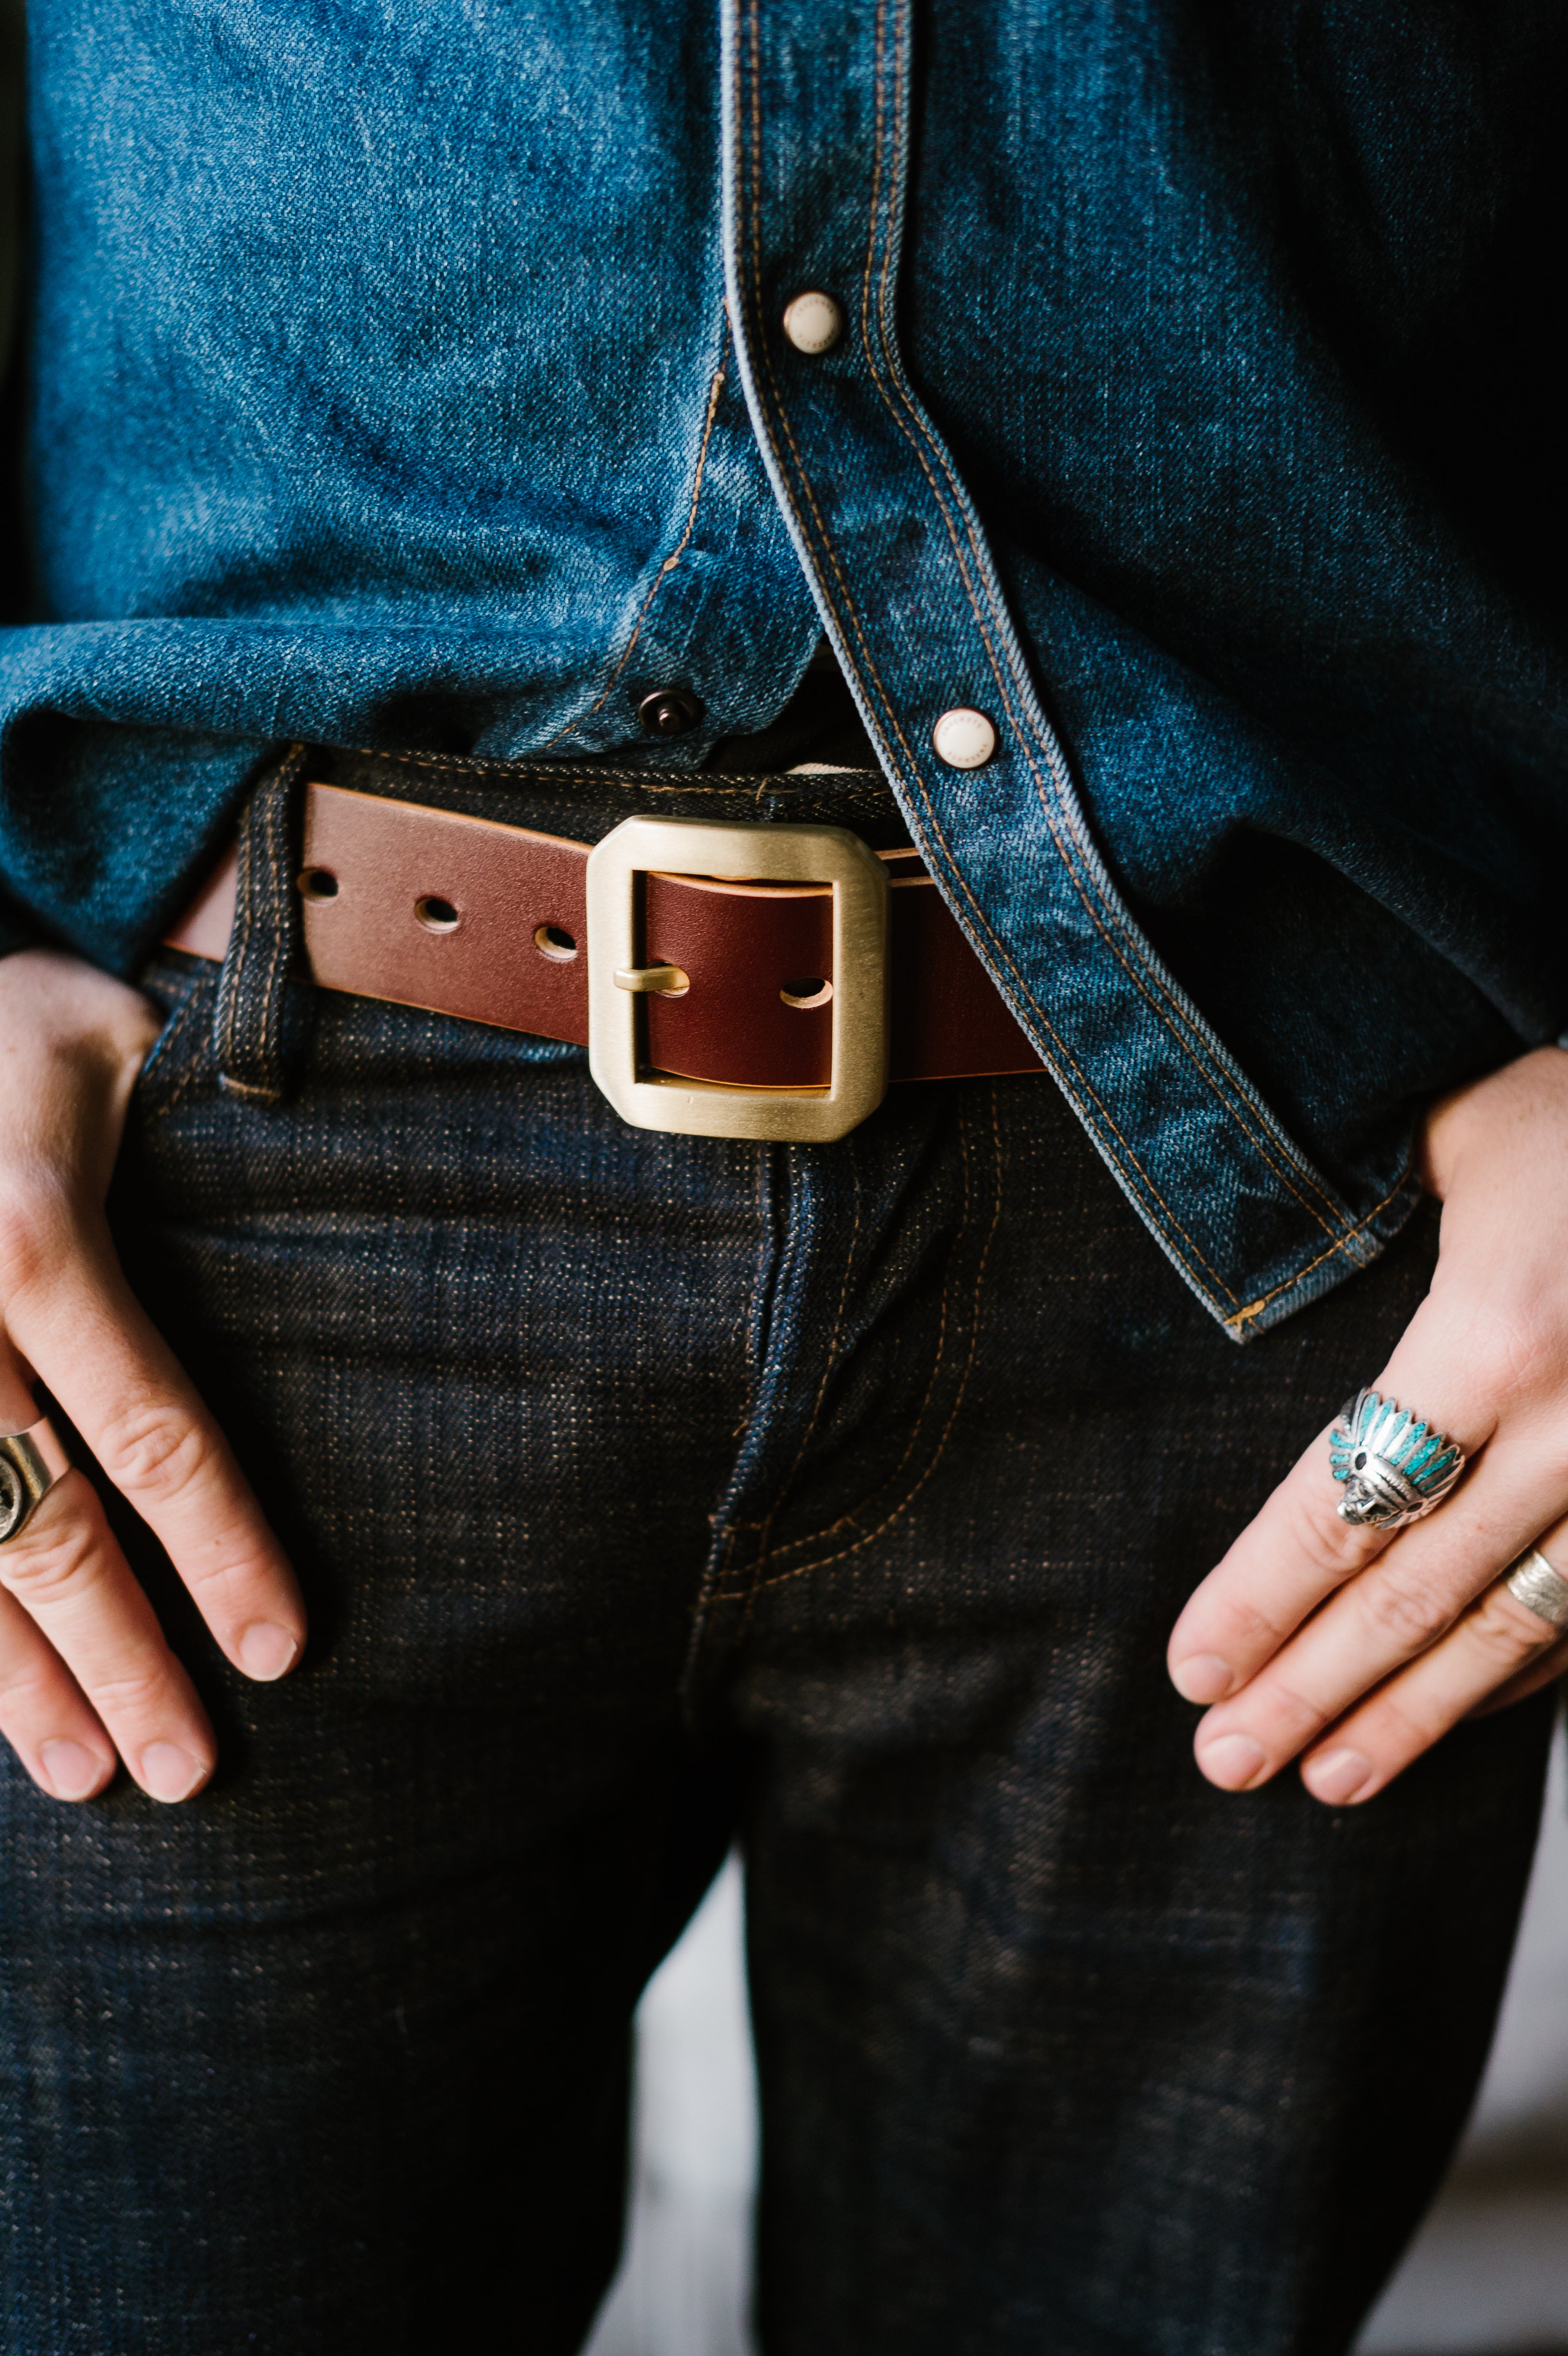 Red Wing Men's Leather Belt